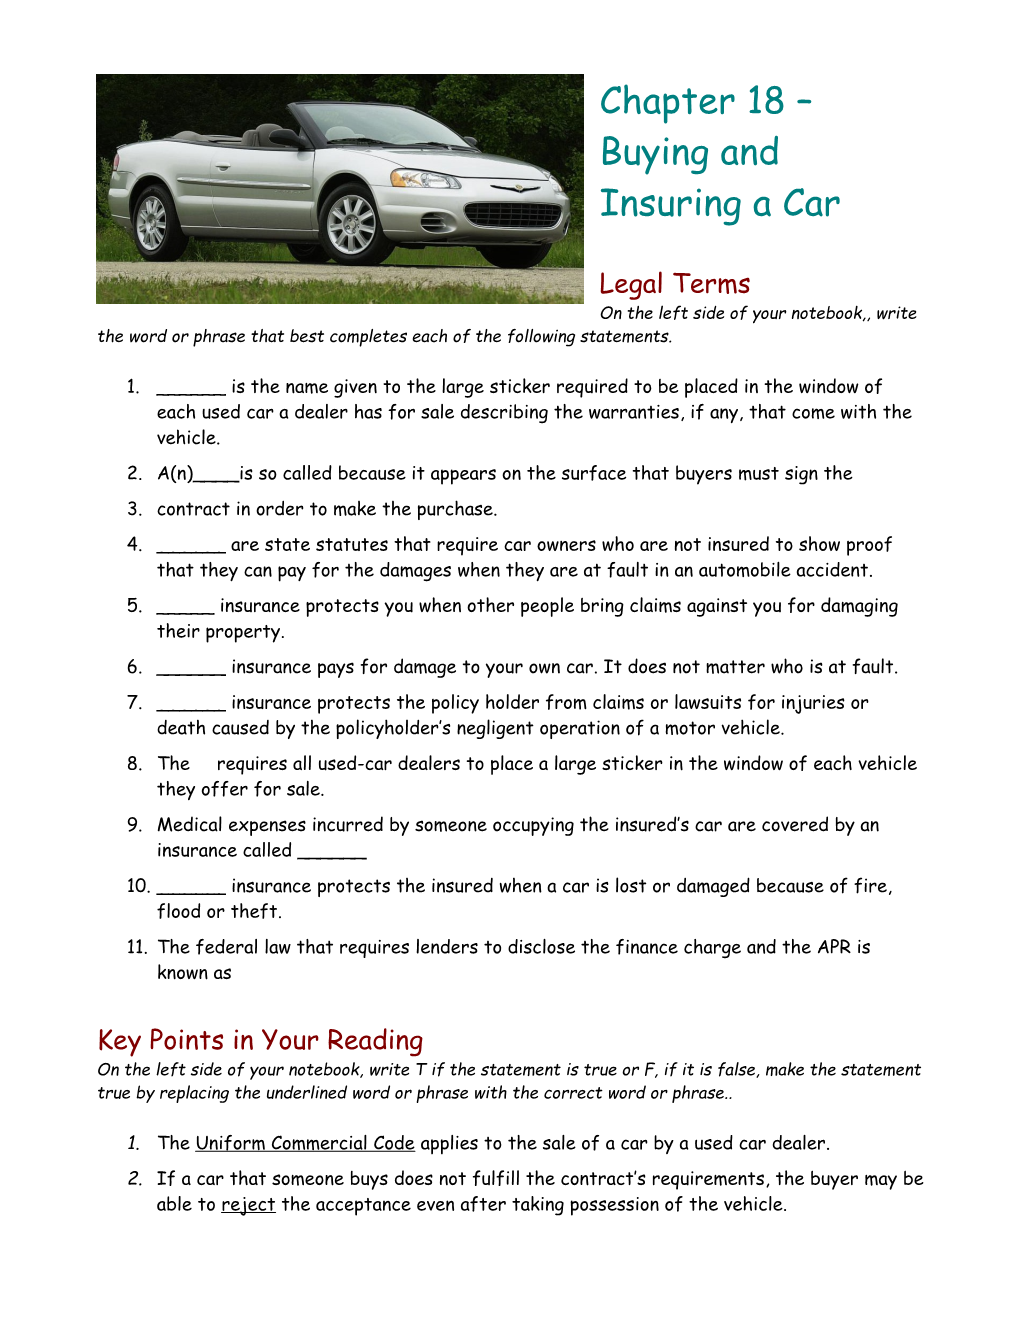 Chapter 18 Buying and Insuring a Car